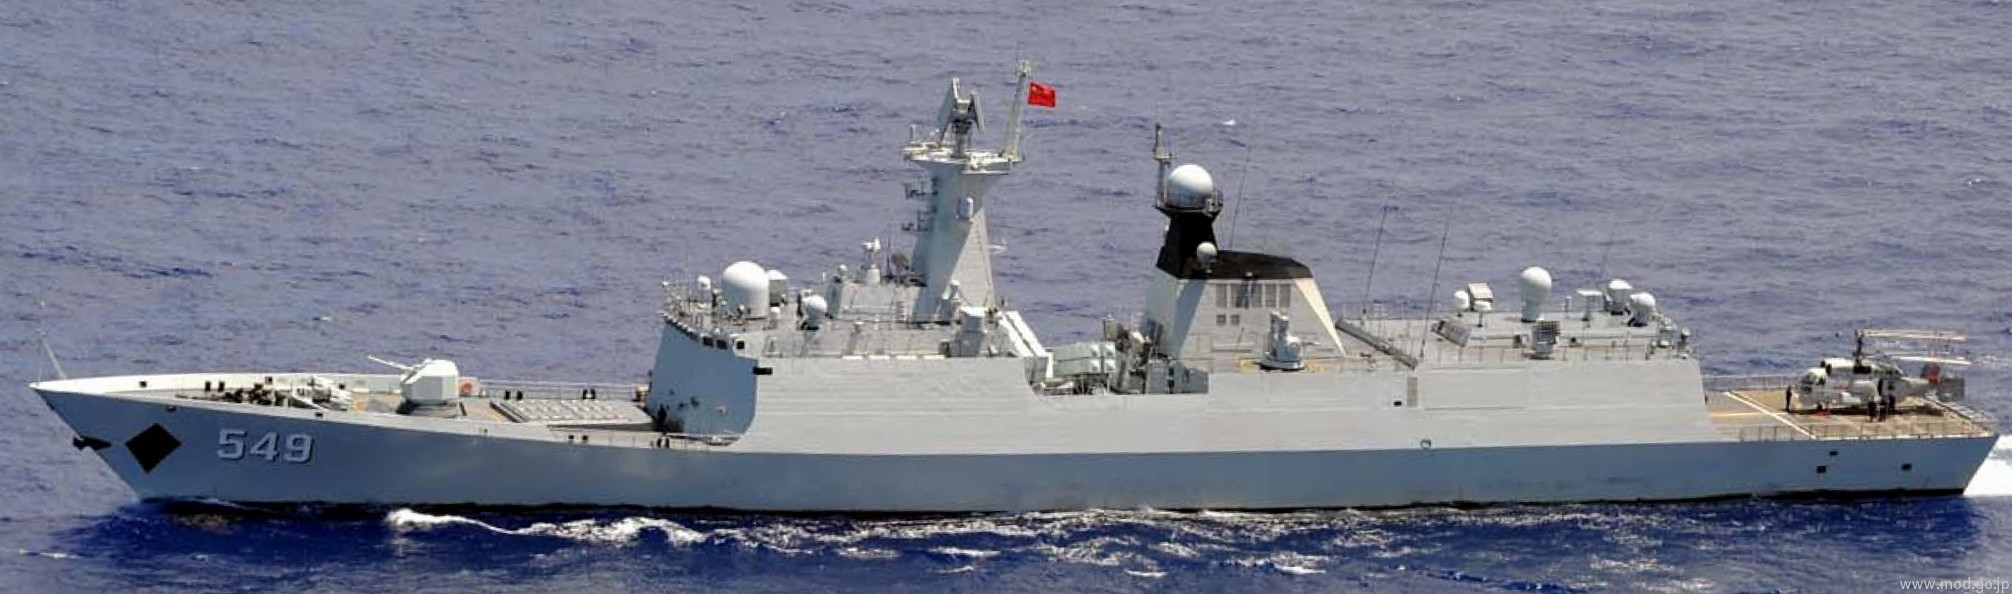 ffg-549 plans changzhou type 054a jiangkai ii class guided missile frigate china people's liberation army navy 02